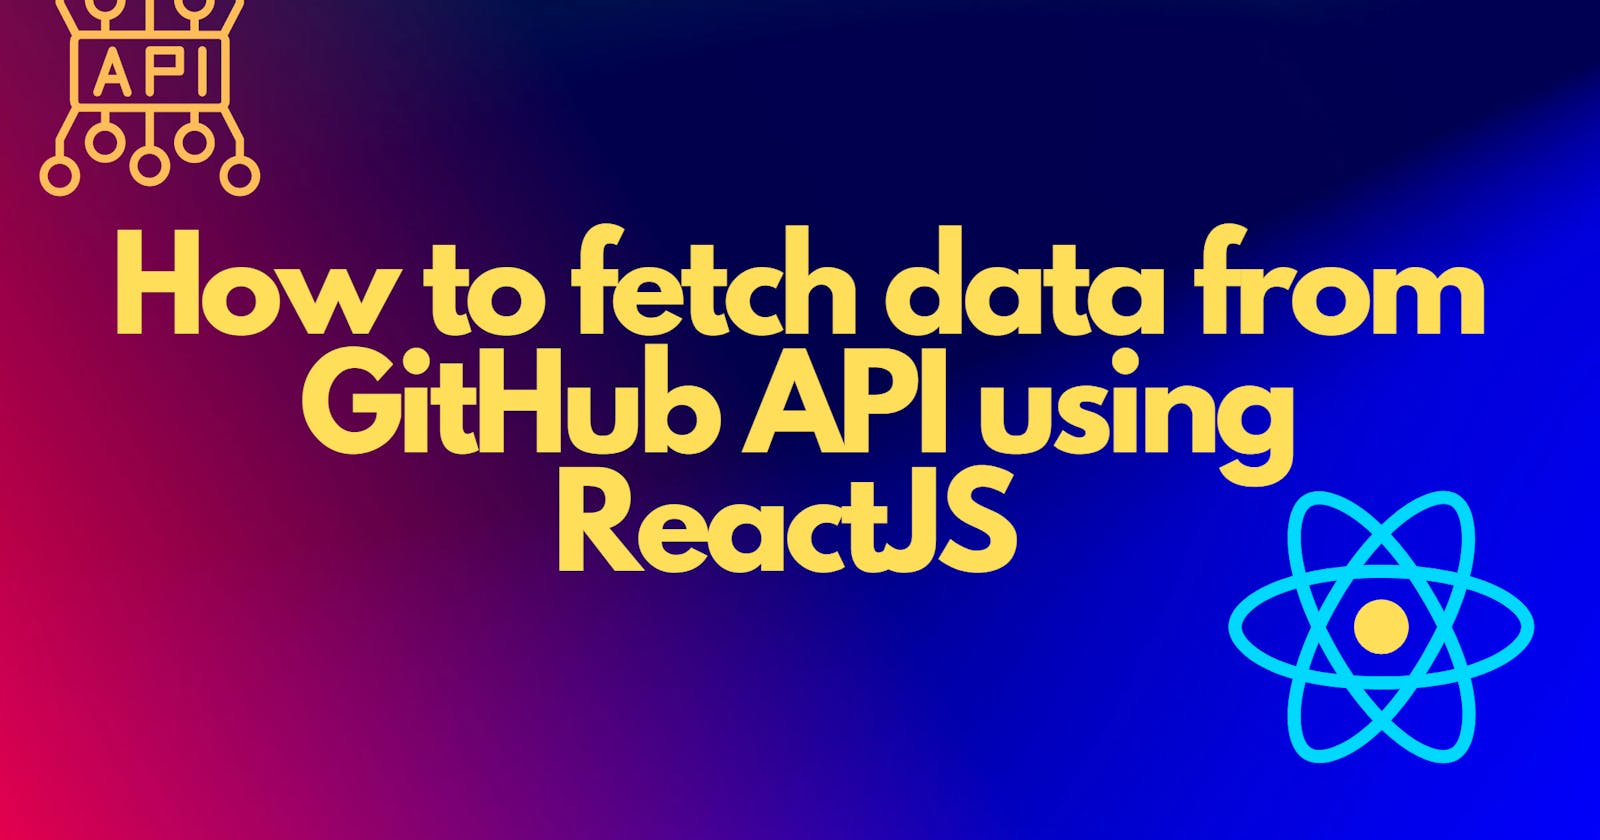 How to Fetch Data From the GitHub API using ReactJS